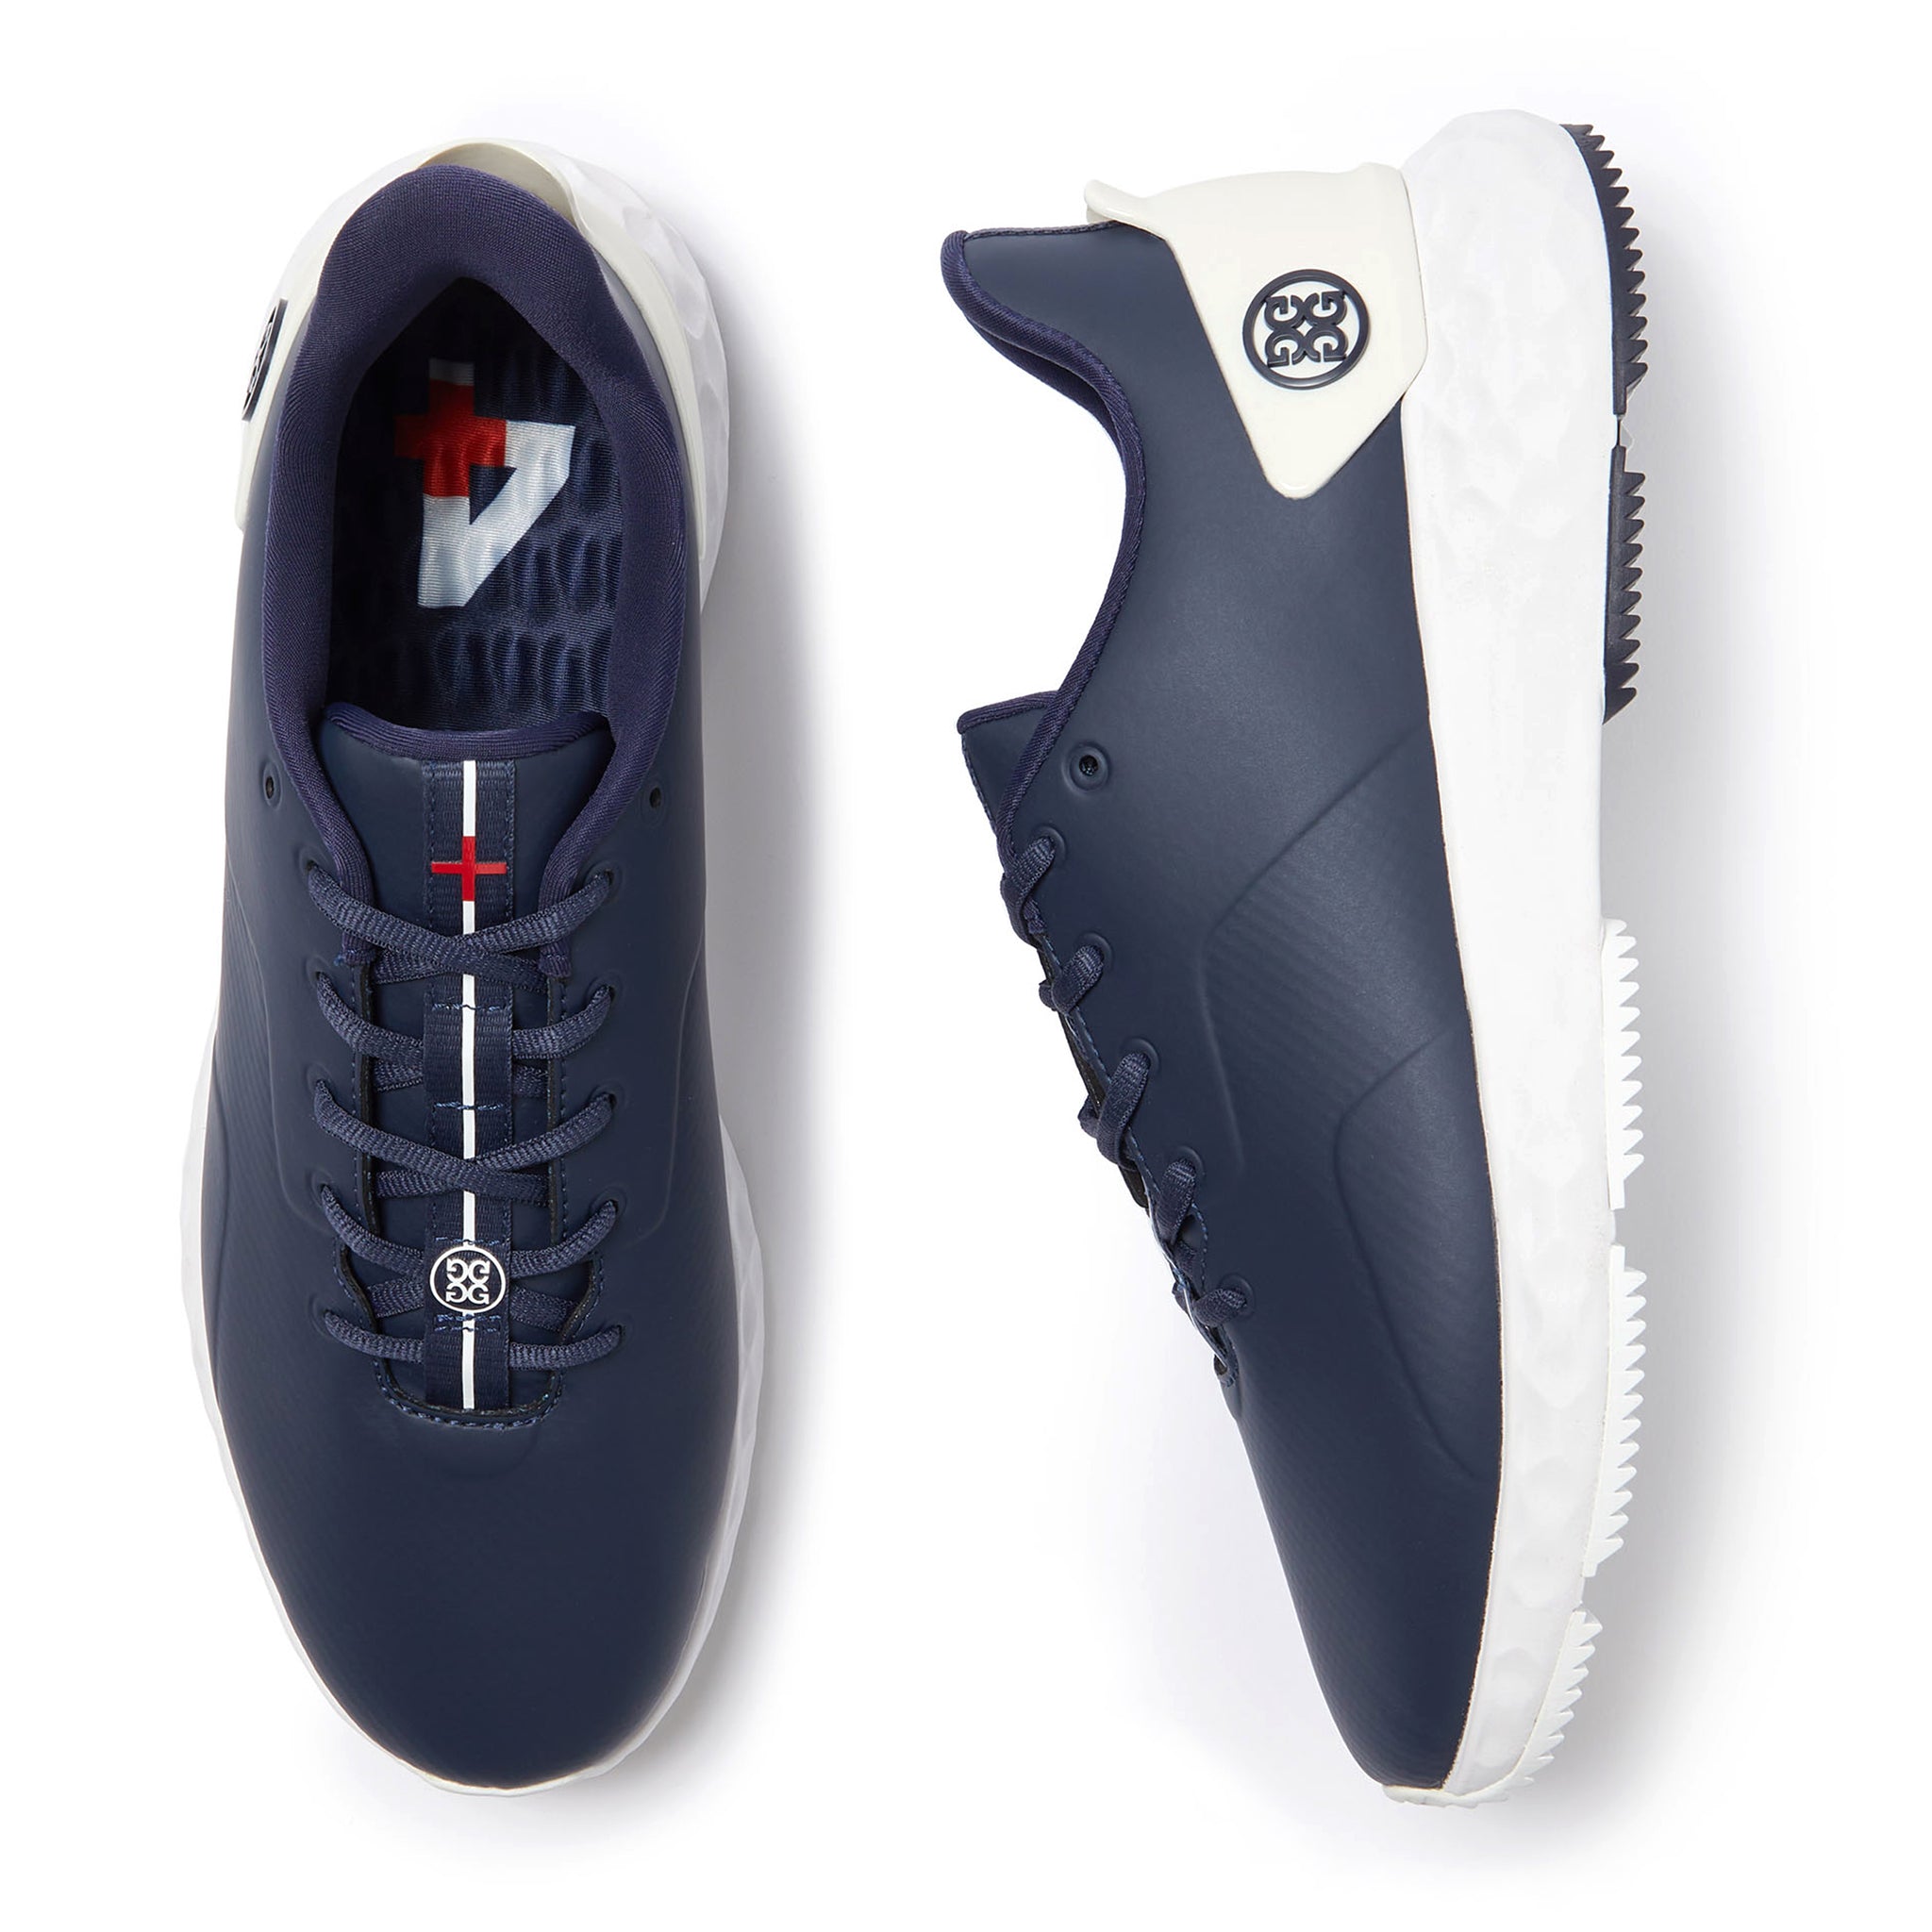 g-fore-mg4-golf-shoes-gmf000014-twilight